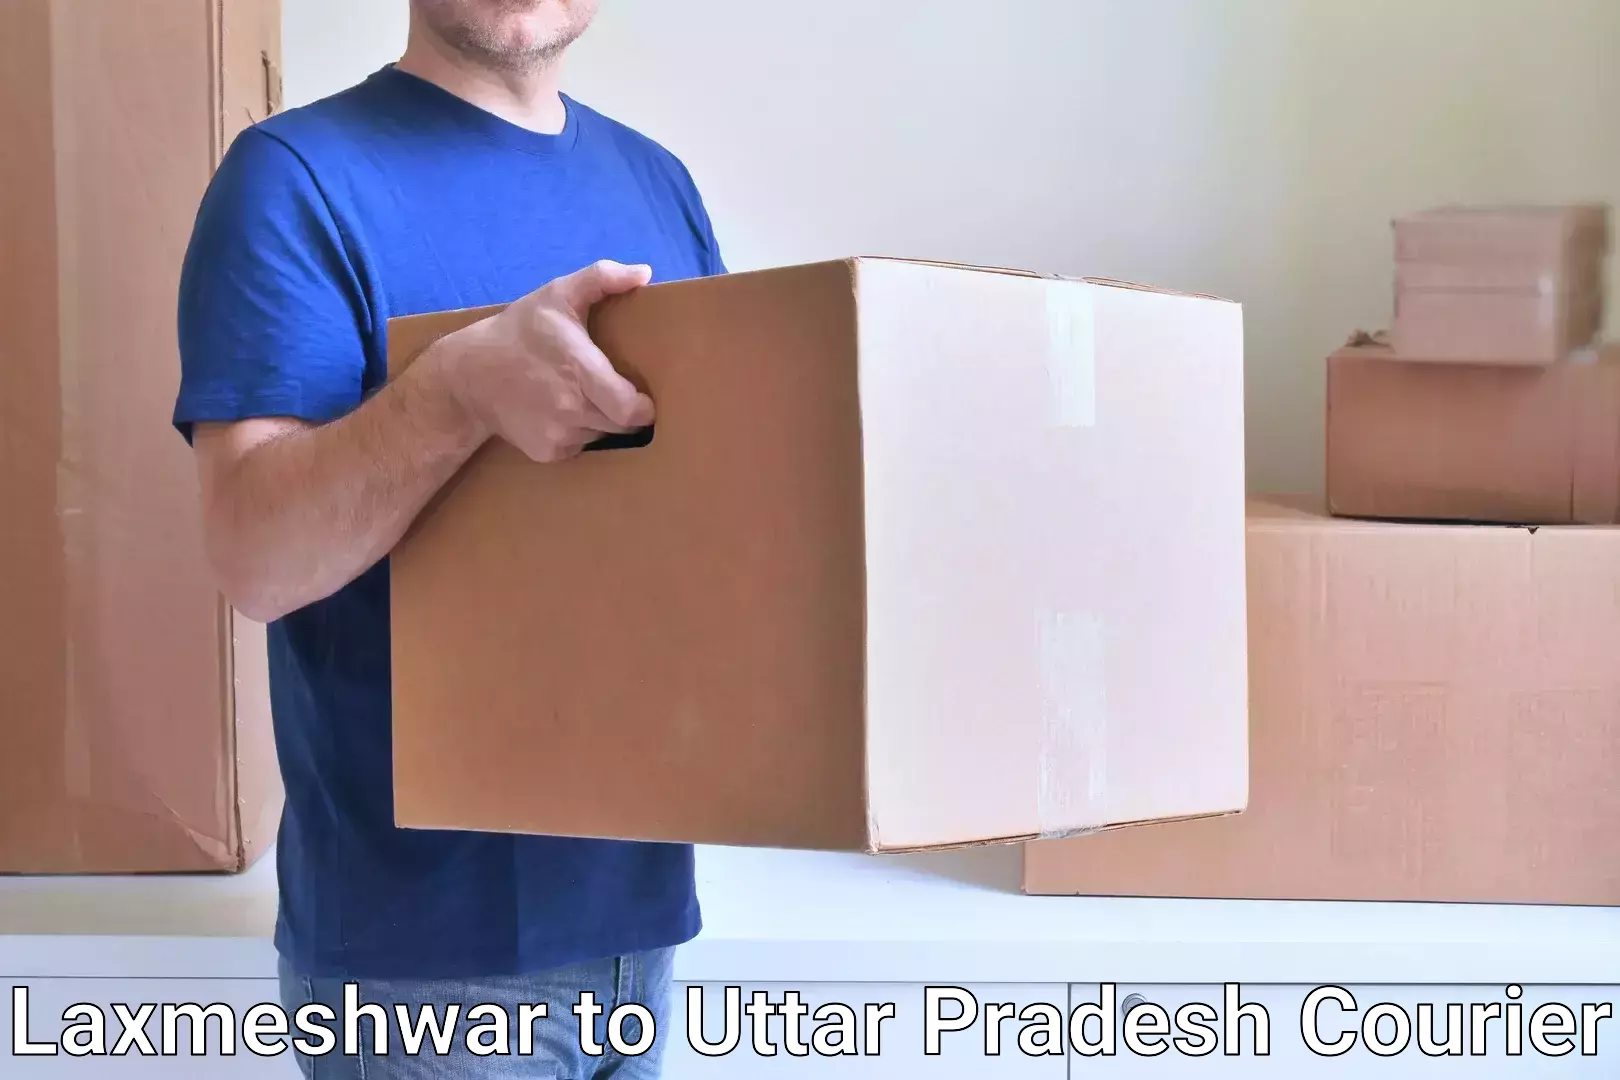 Courier service efficiency Laxmeshwar to Afzalgarh